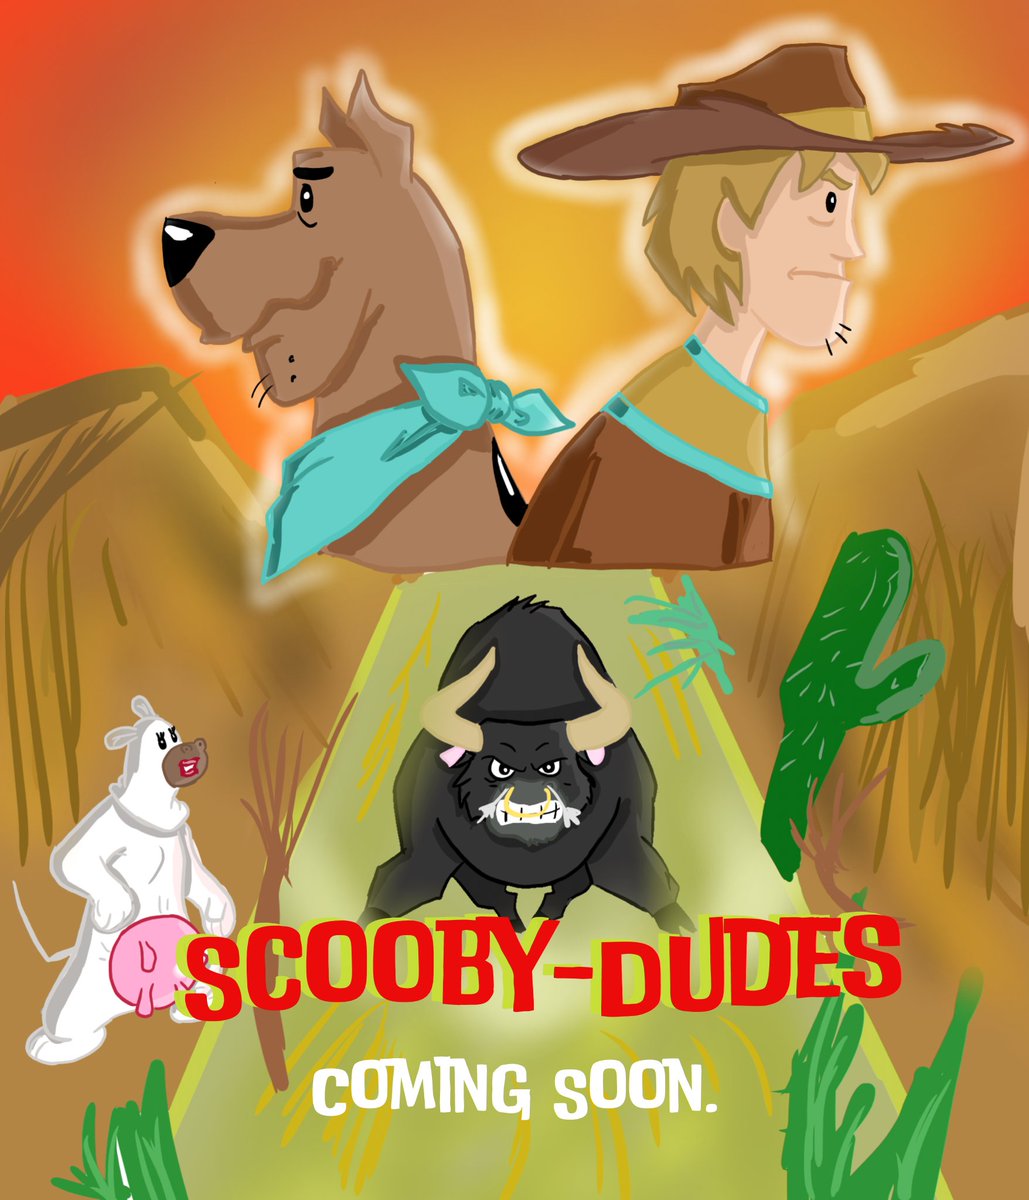 Shaggy & Scooby-Doo Get A Clue Title Card Re-Creation

Day 24 - Scooby-Dudes

Art by: Scoobyverse
instagram.com/scoobyverse/

#ScoobyDoo #Art #Drawing #DrawingChallenge #GetAClue #Scooby #TitleCardRecreation